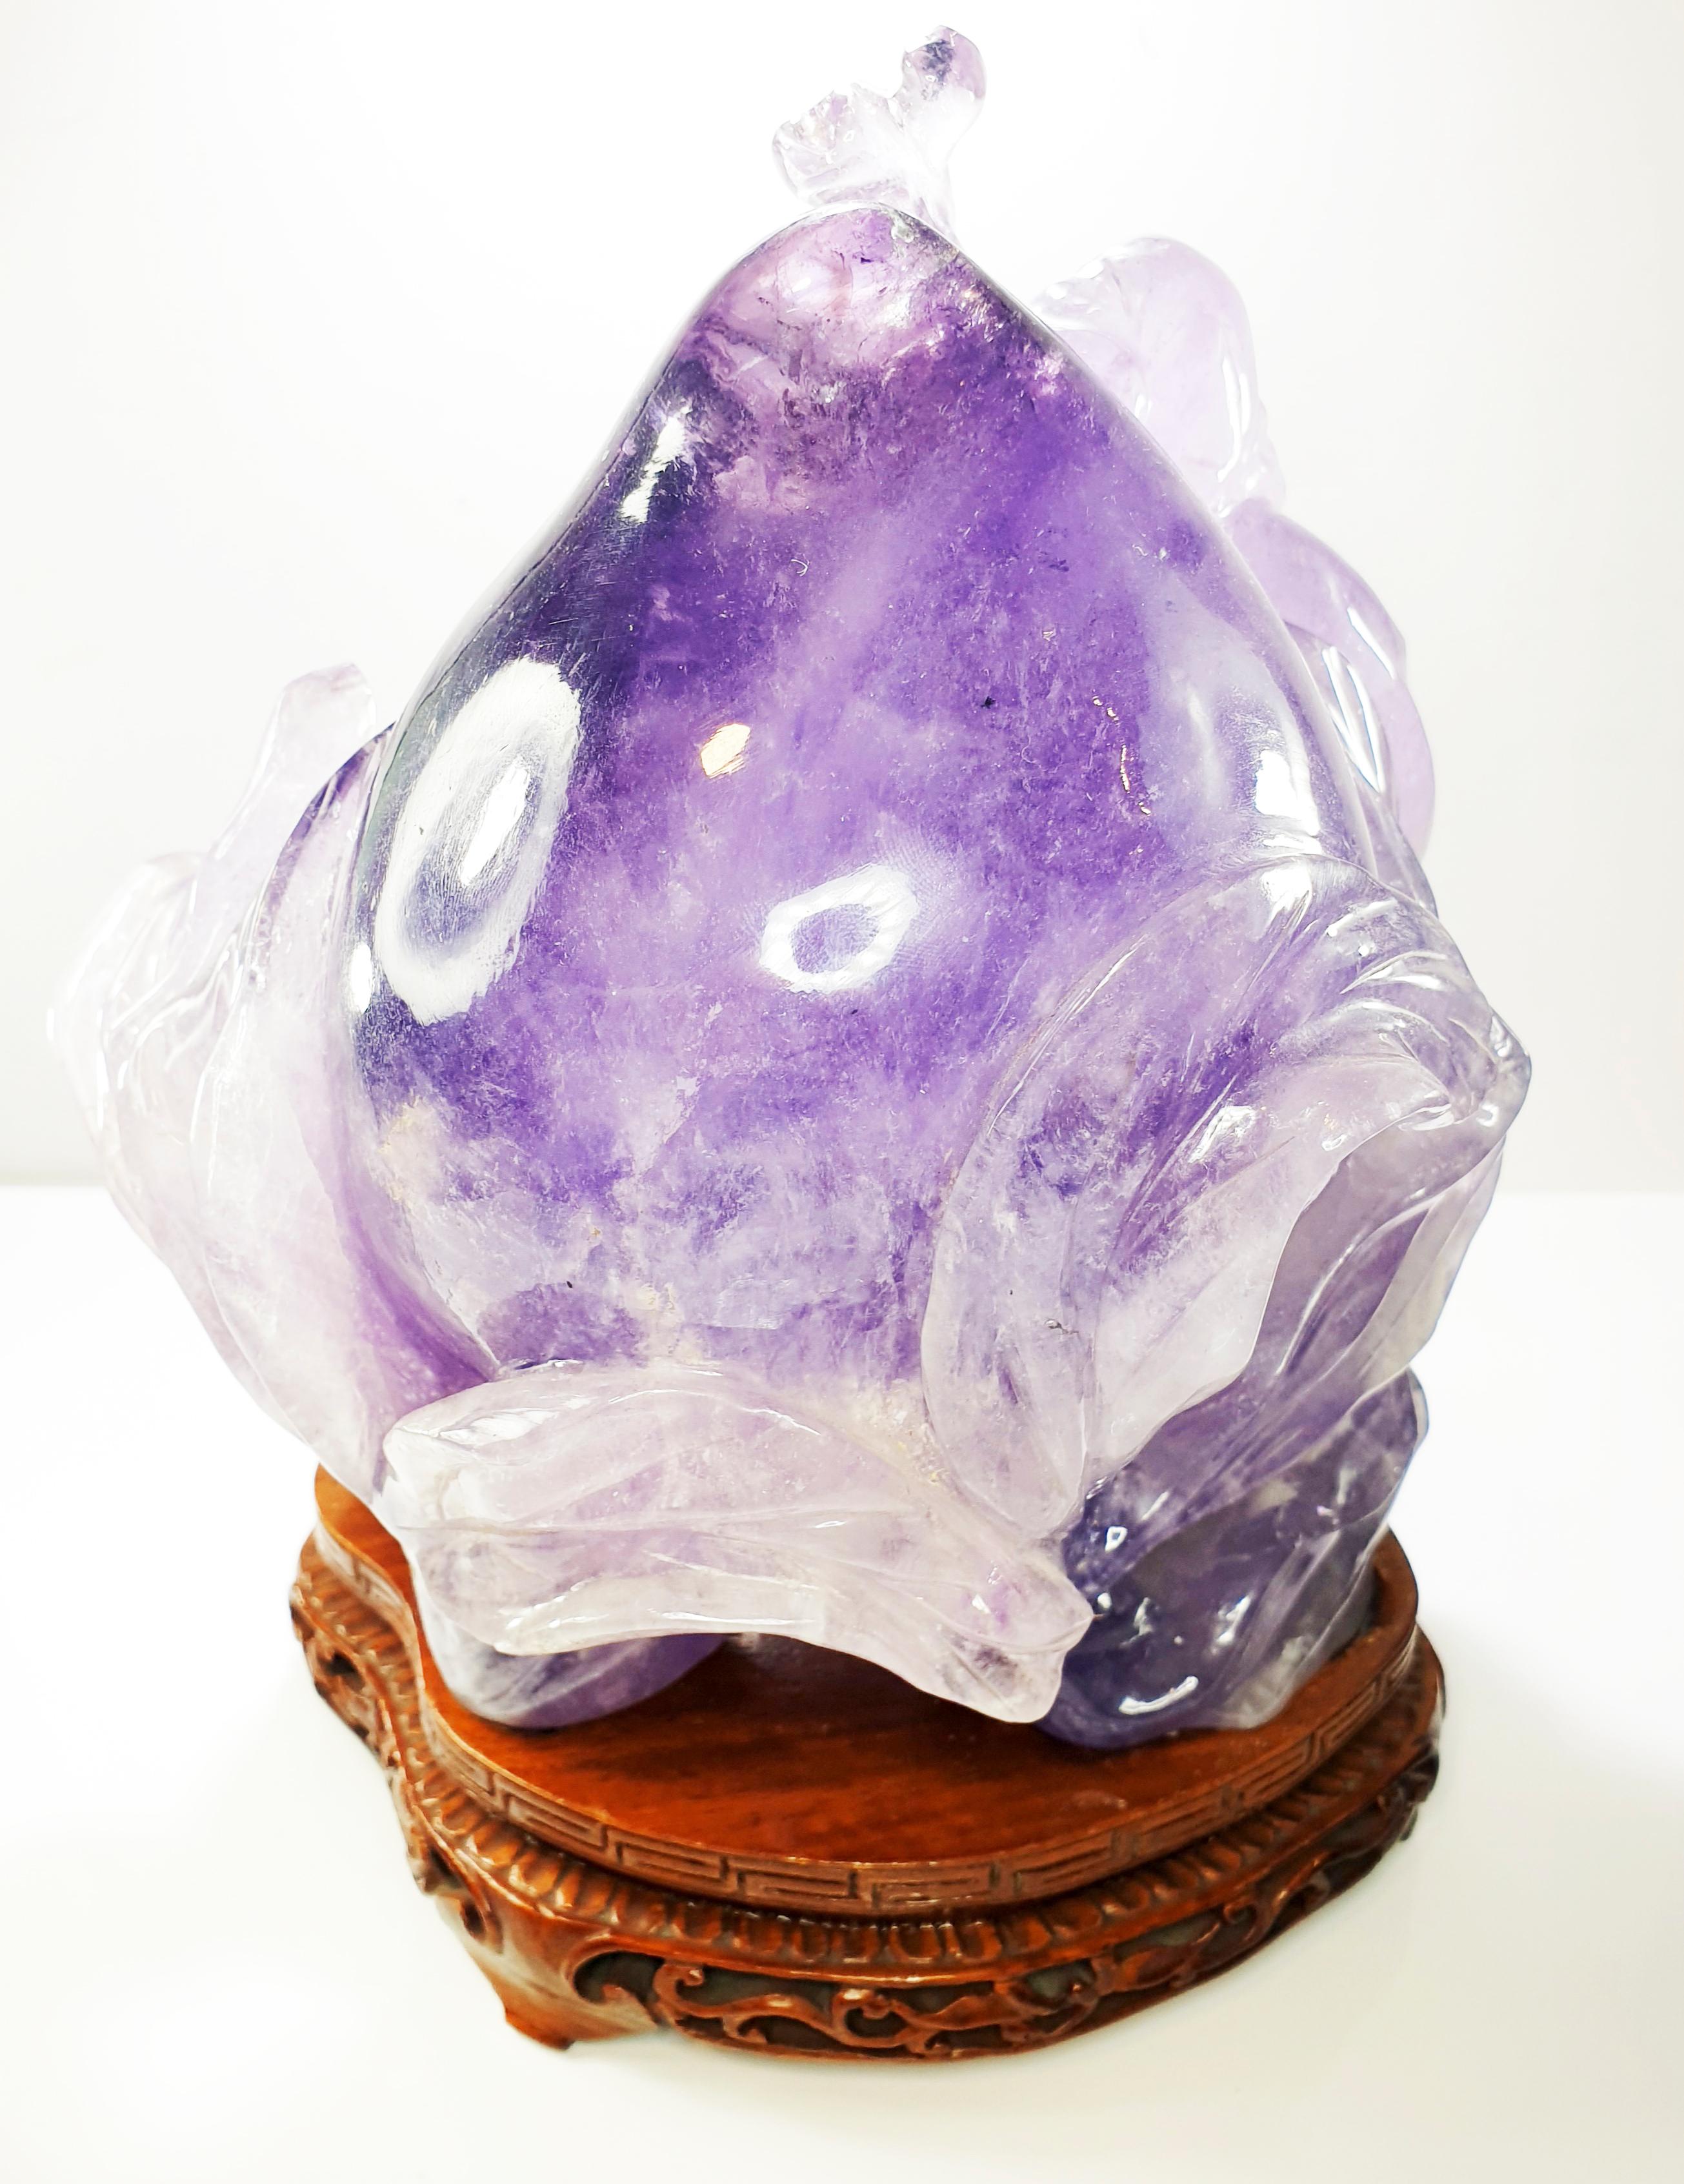 Artisan Carved 3.5kg Hardstone Amethyst Figure of Shoulao the Inmortal Chinese God For Sale